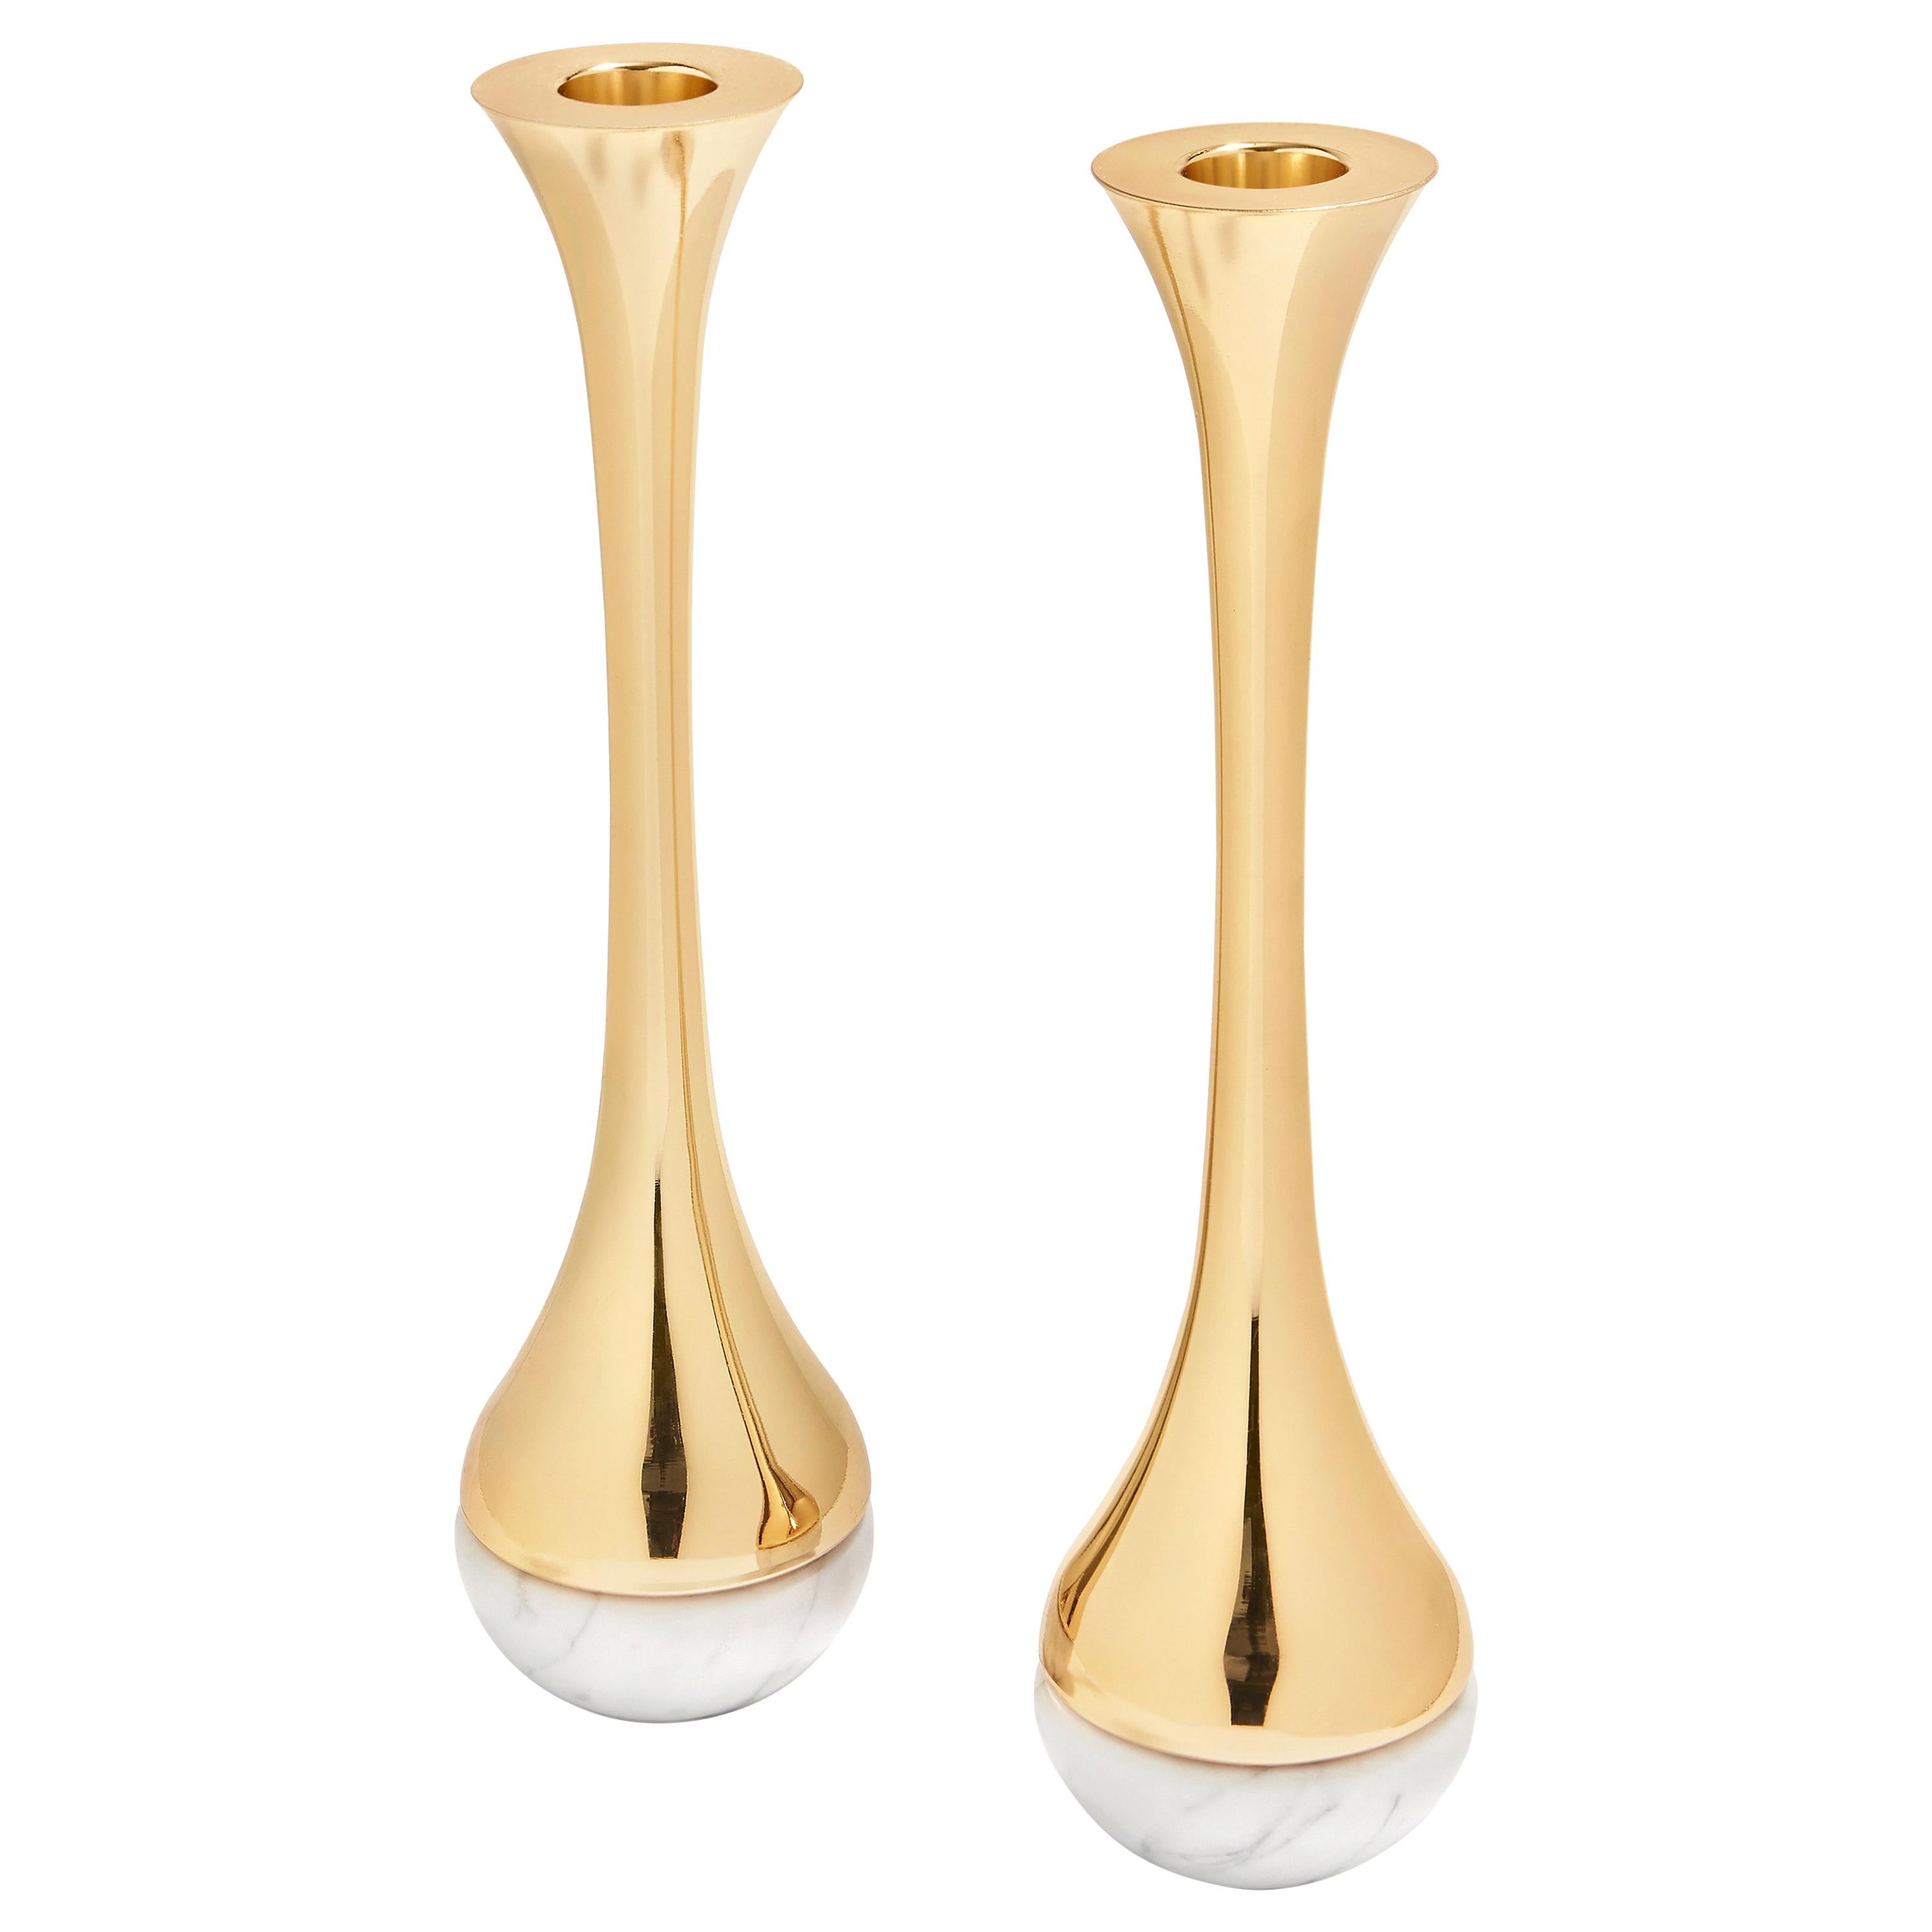 Dual Candlestick Set in Marble and Polished Gold Metal by ANNA new york For Sale